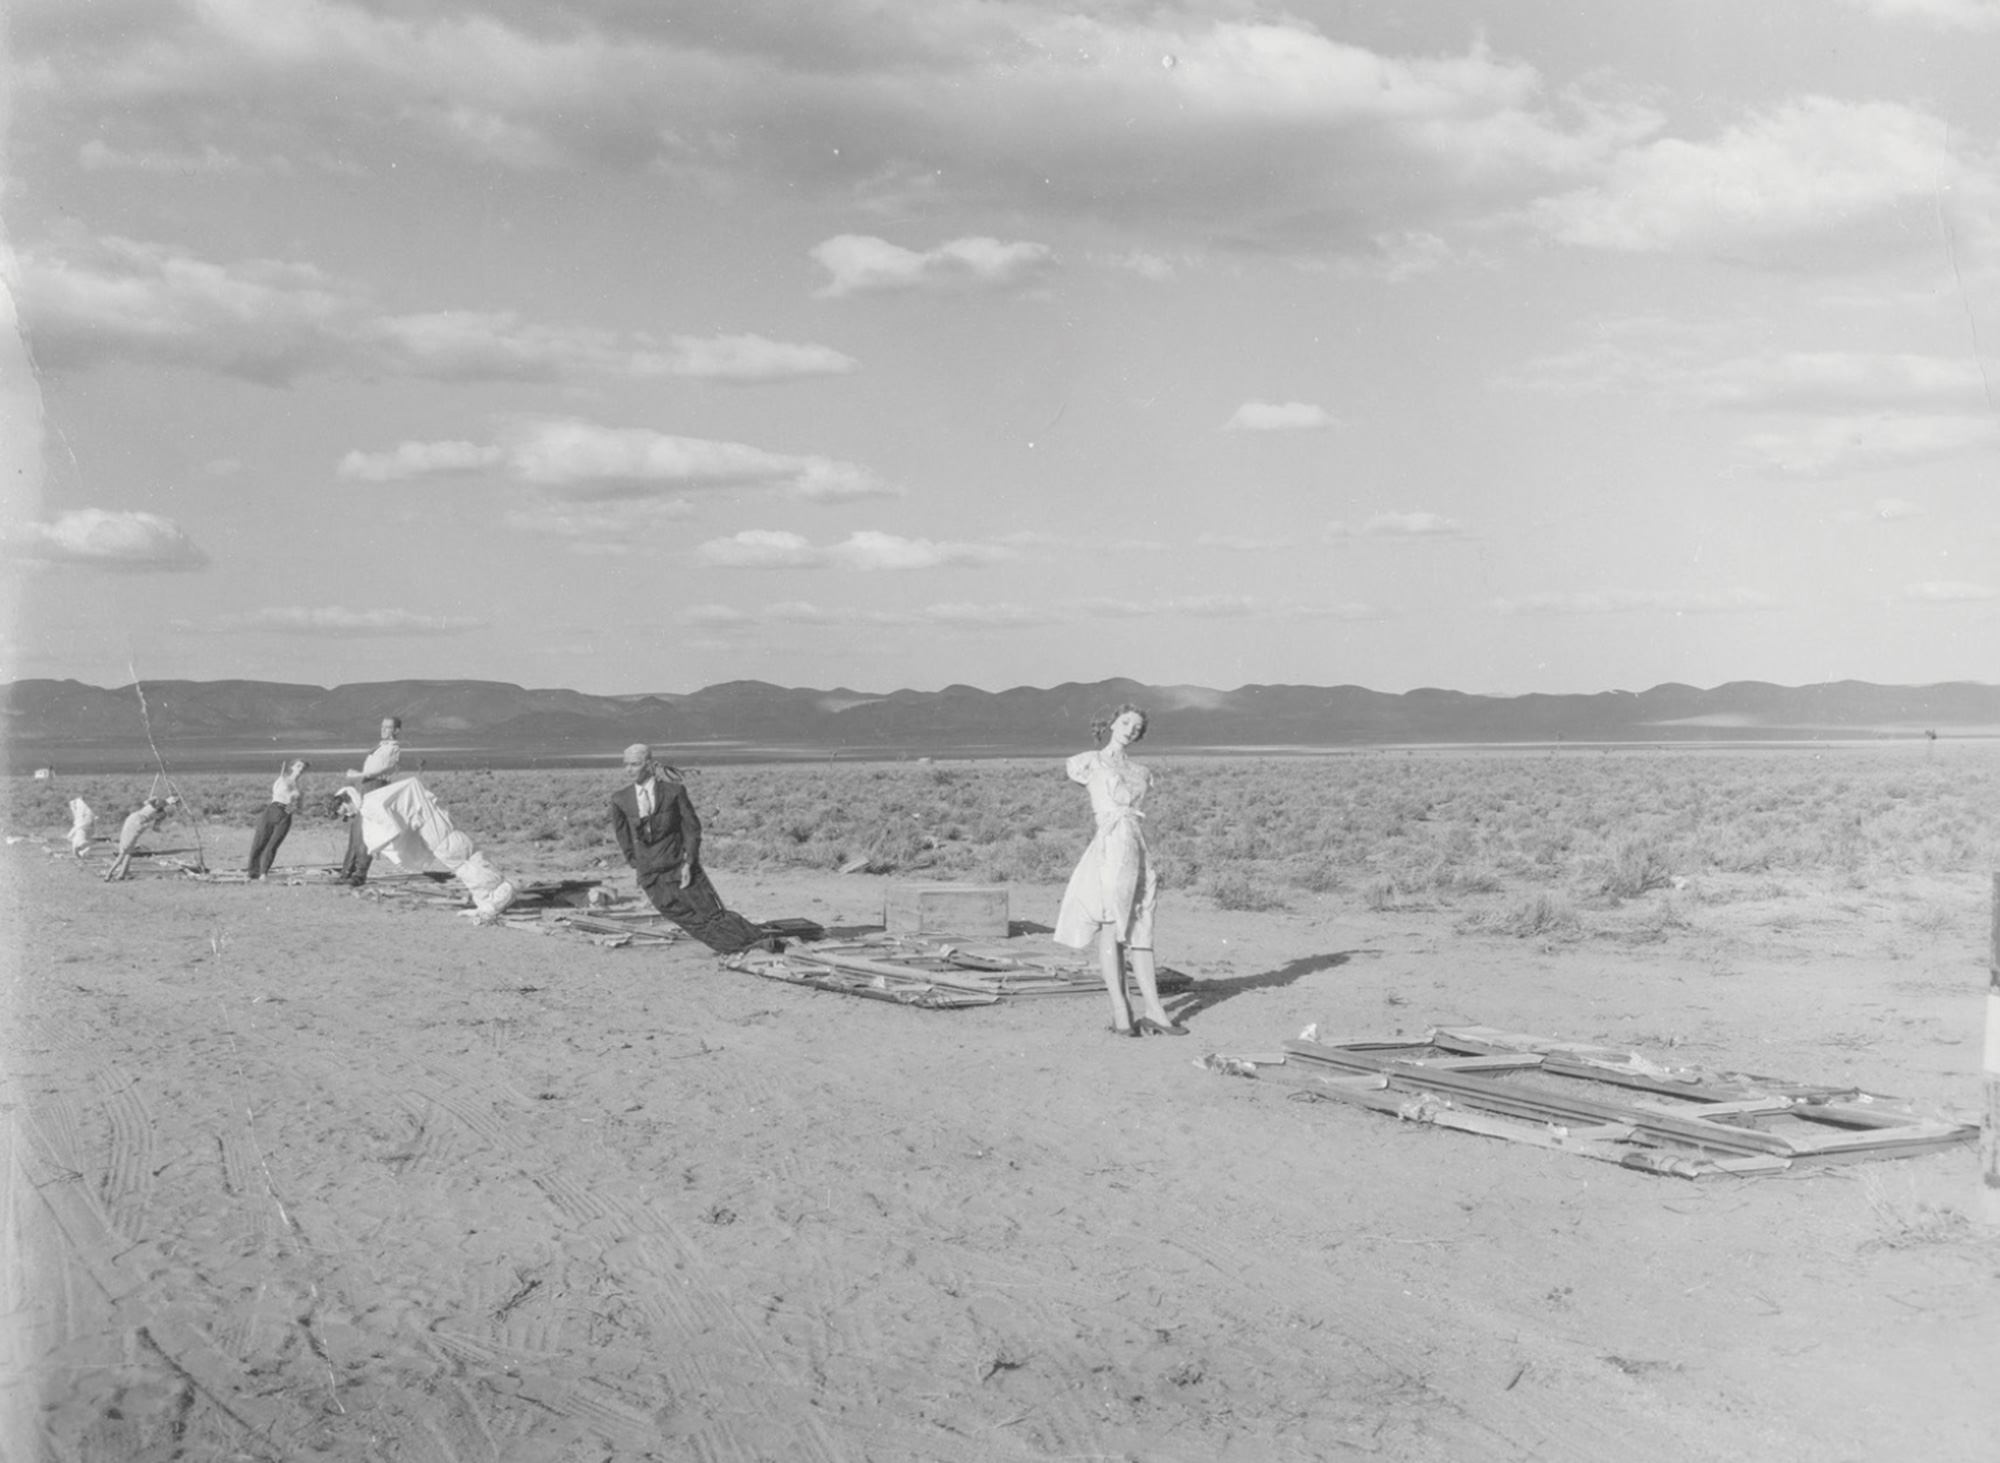 A photograph from Operation Cue depicting a group of damaged mannequins who had been installed outdoors.